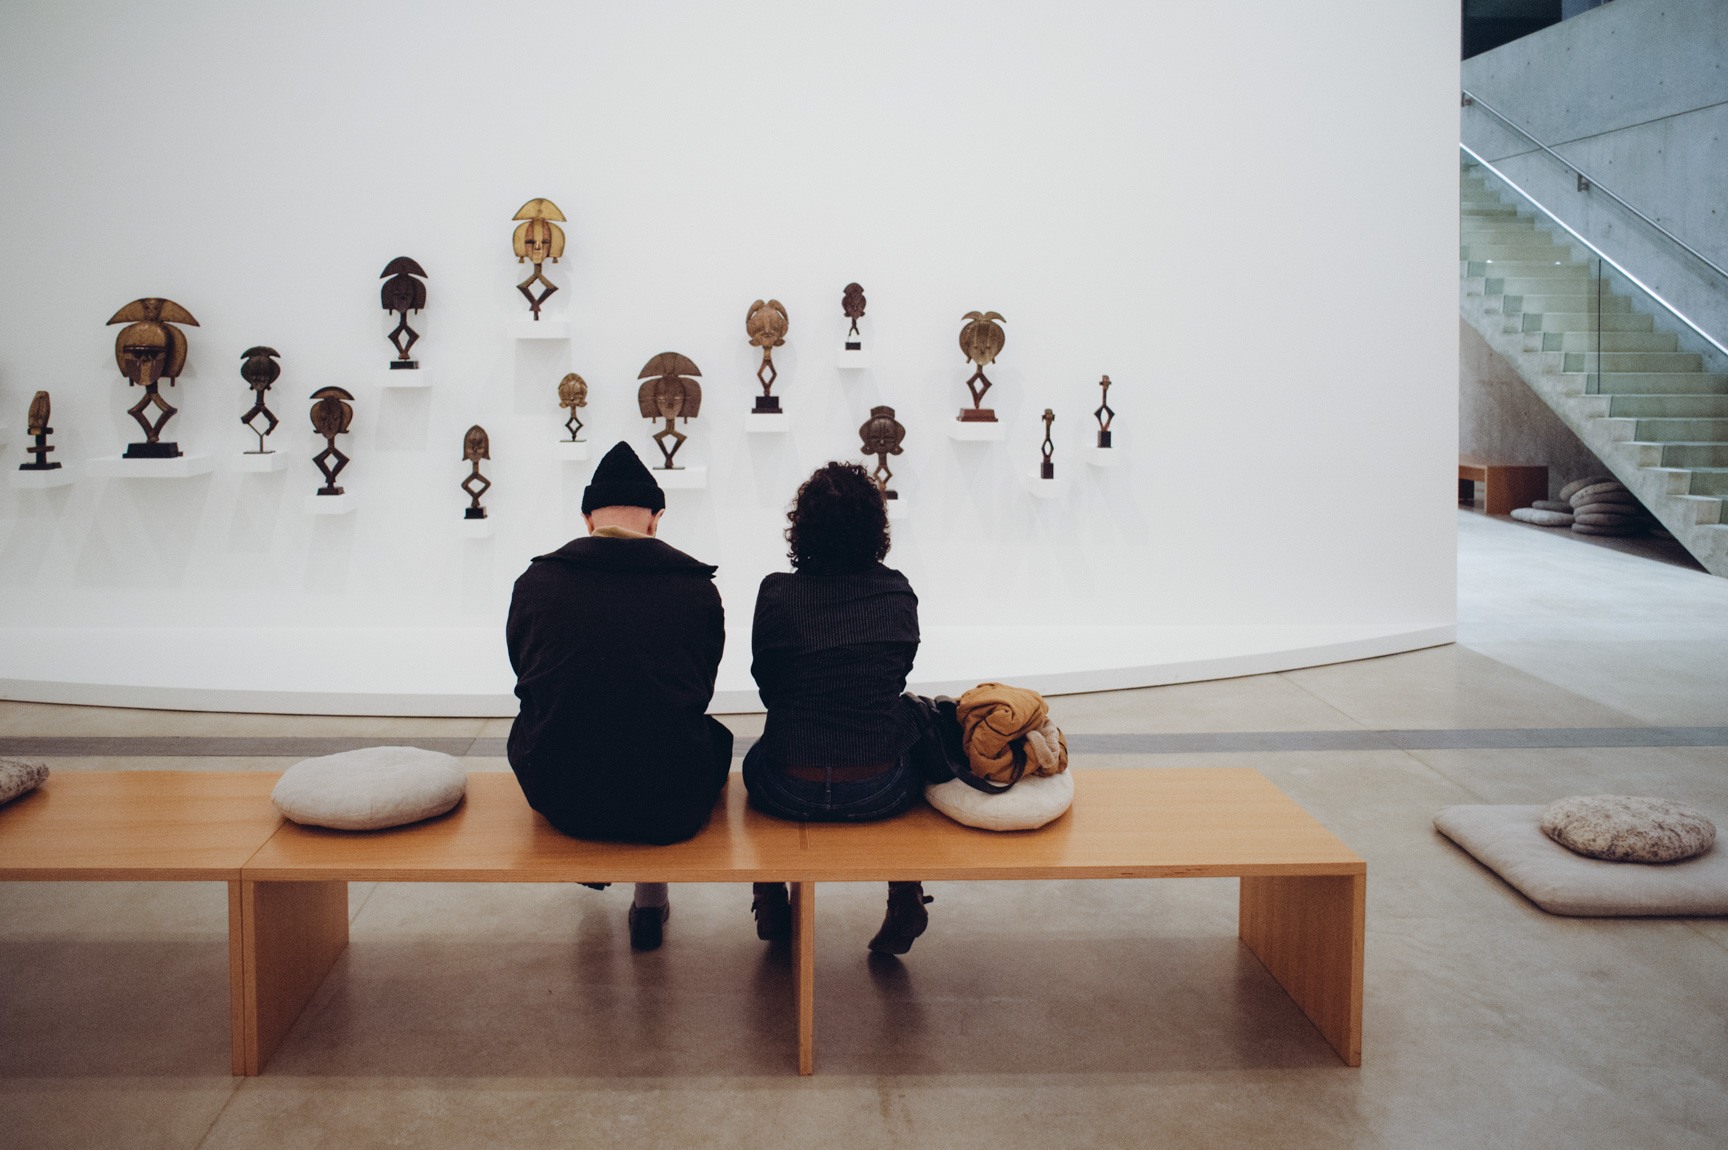 Two visitors sit on a wooden bench and view the wall of displayed African sculptures in the Main Gallery.